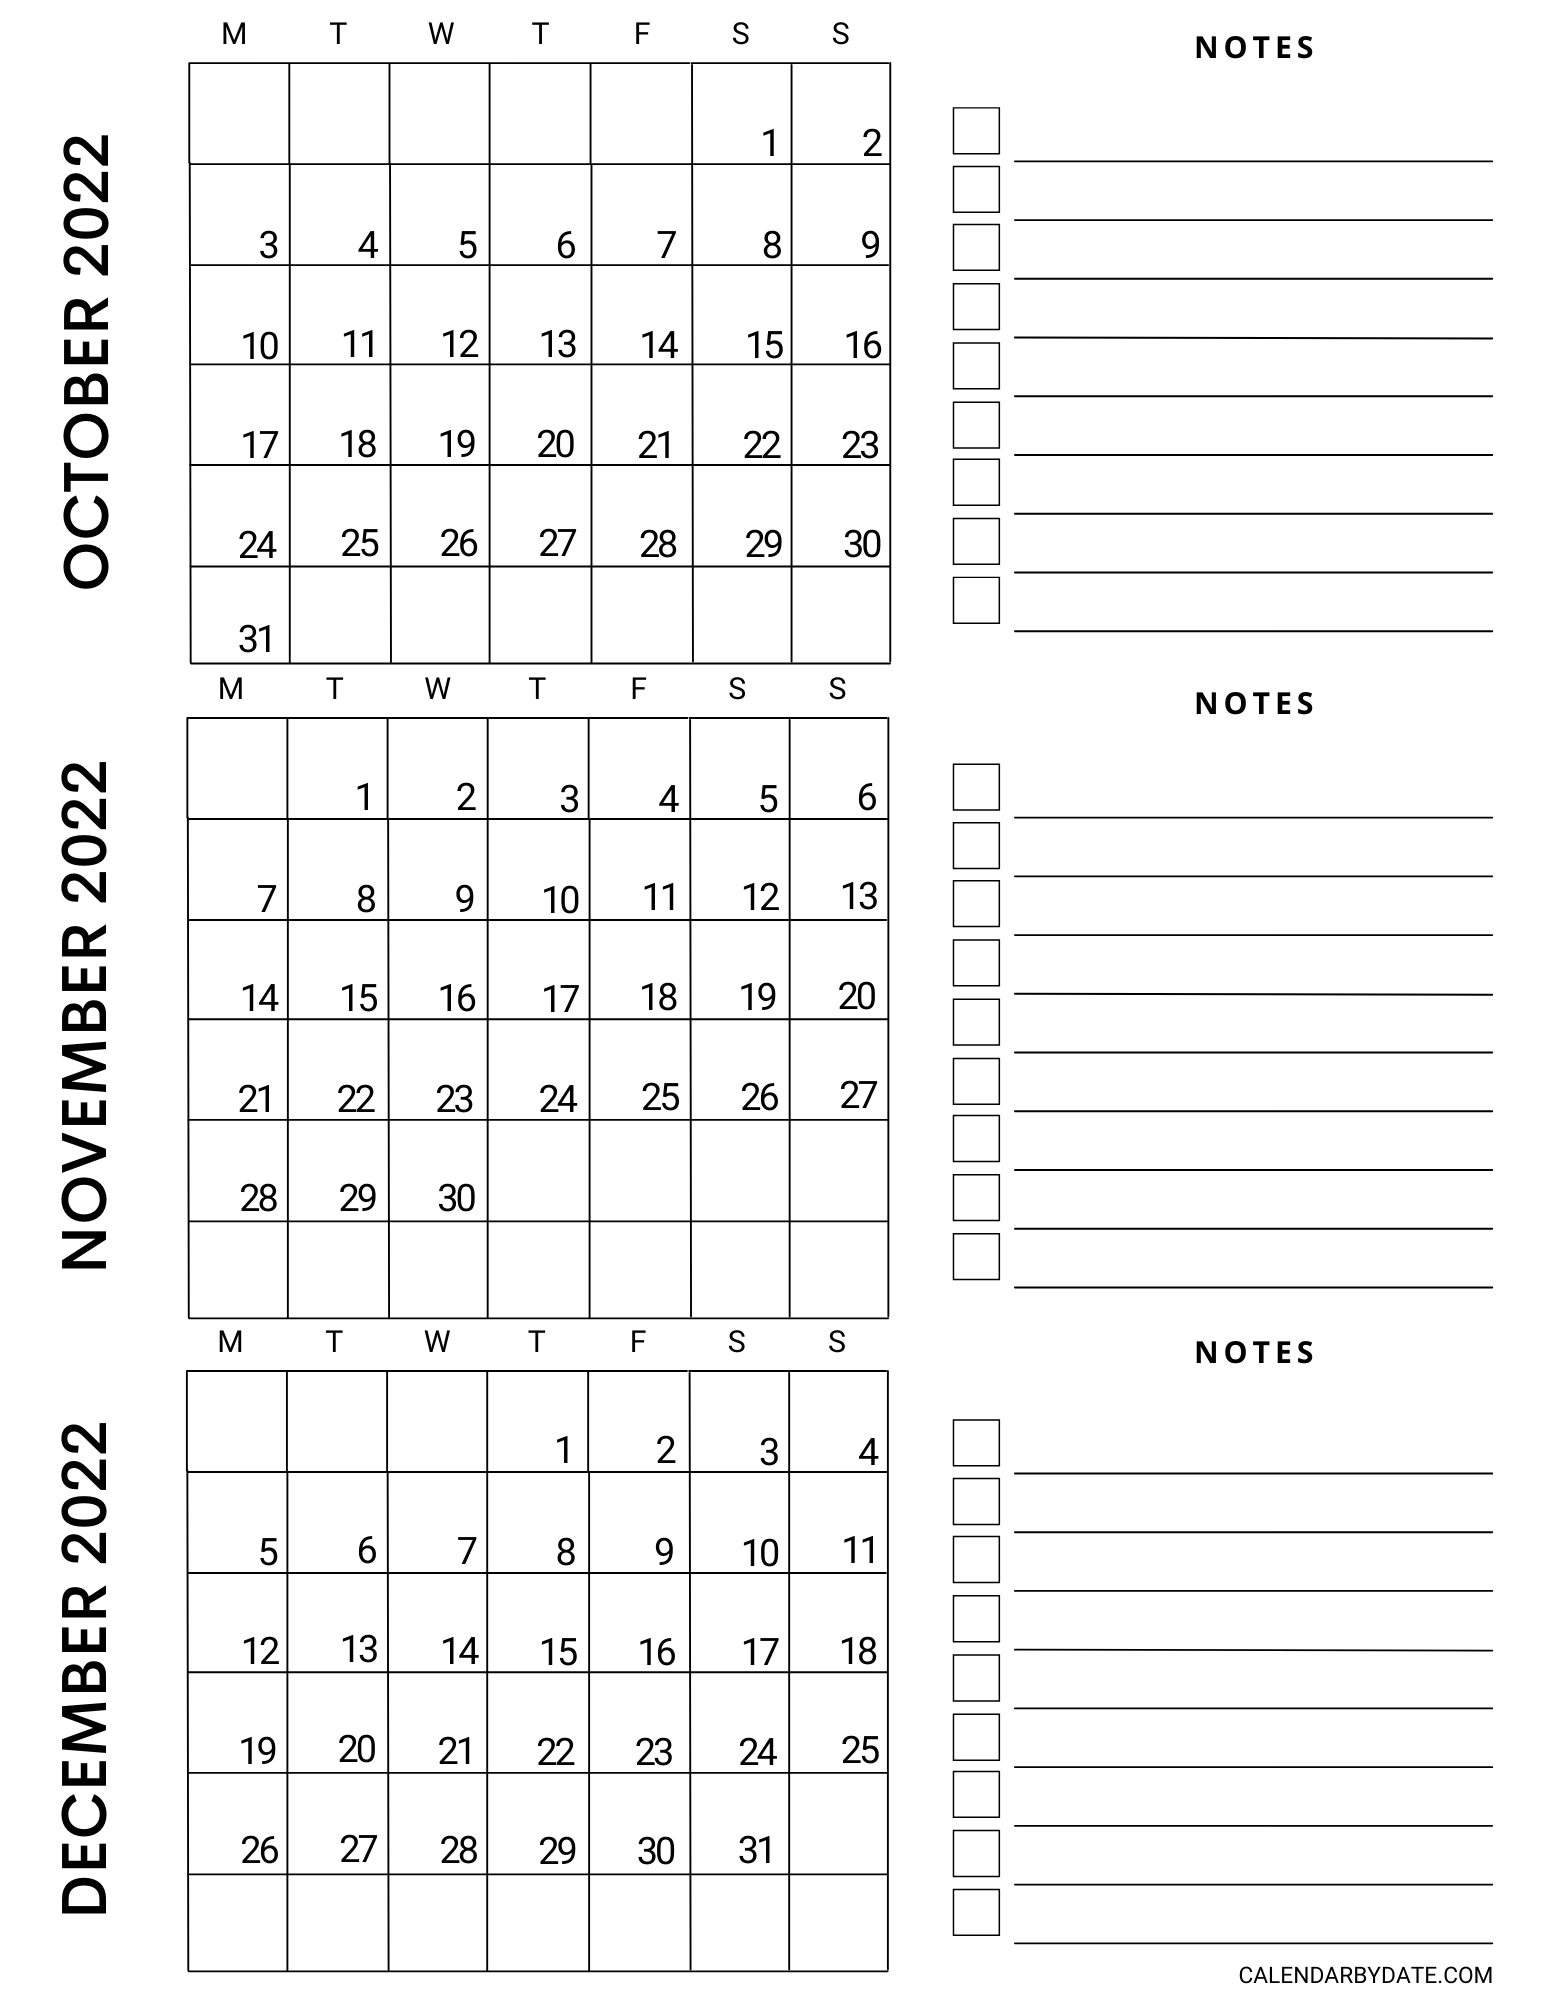 On one page, October November December 2022 calendar template is designed in a portrait layout. Three calendar grids with bold monthly dates are created in the left section. A blank notes section with checklists is provided on the right side for writing three-month goals and noteworthy events.